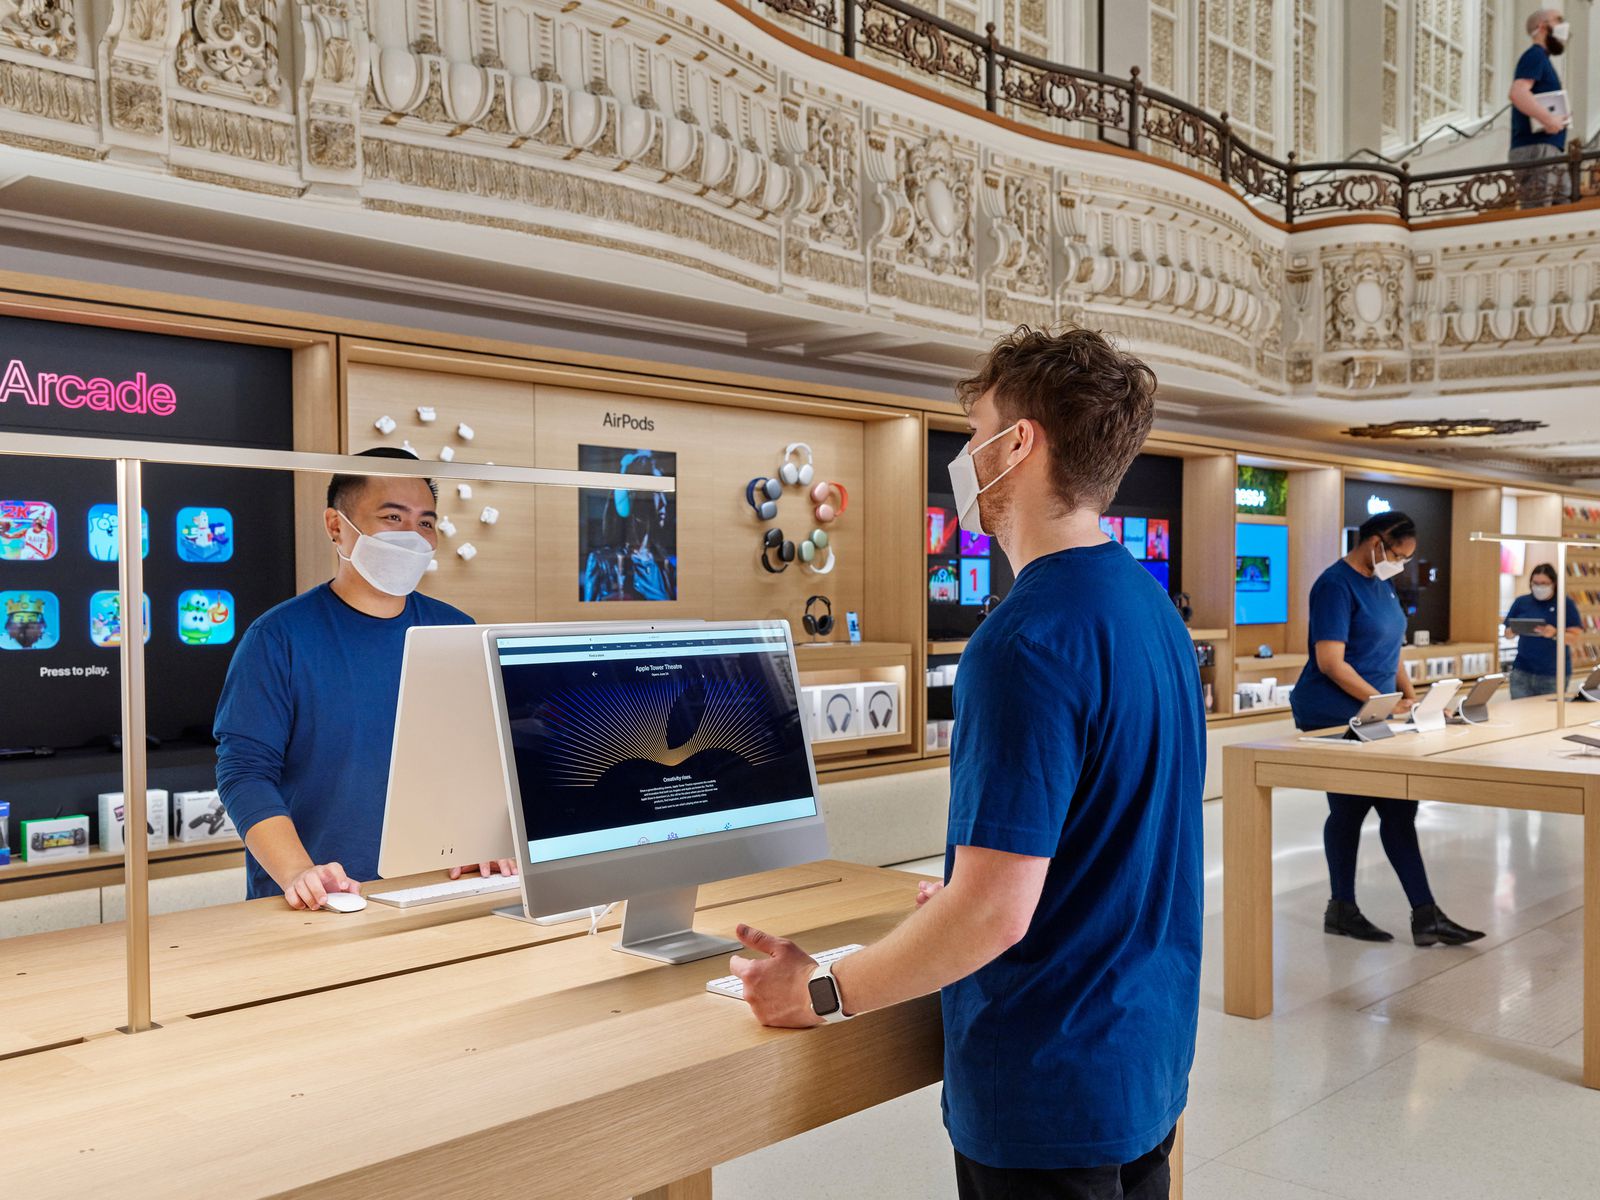 Apple Opening Three New Stores Next Saturday, Including First in Downtown  Miami - MacRumors